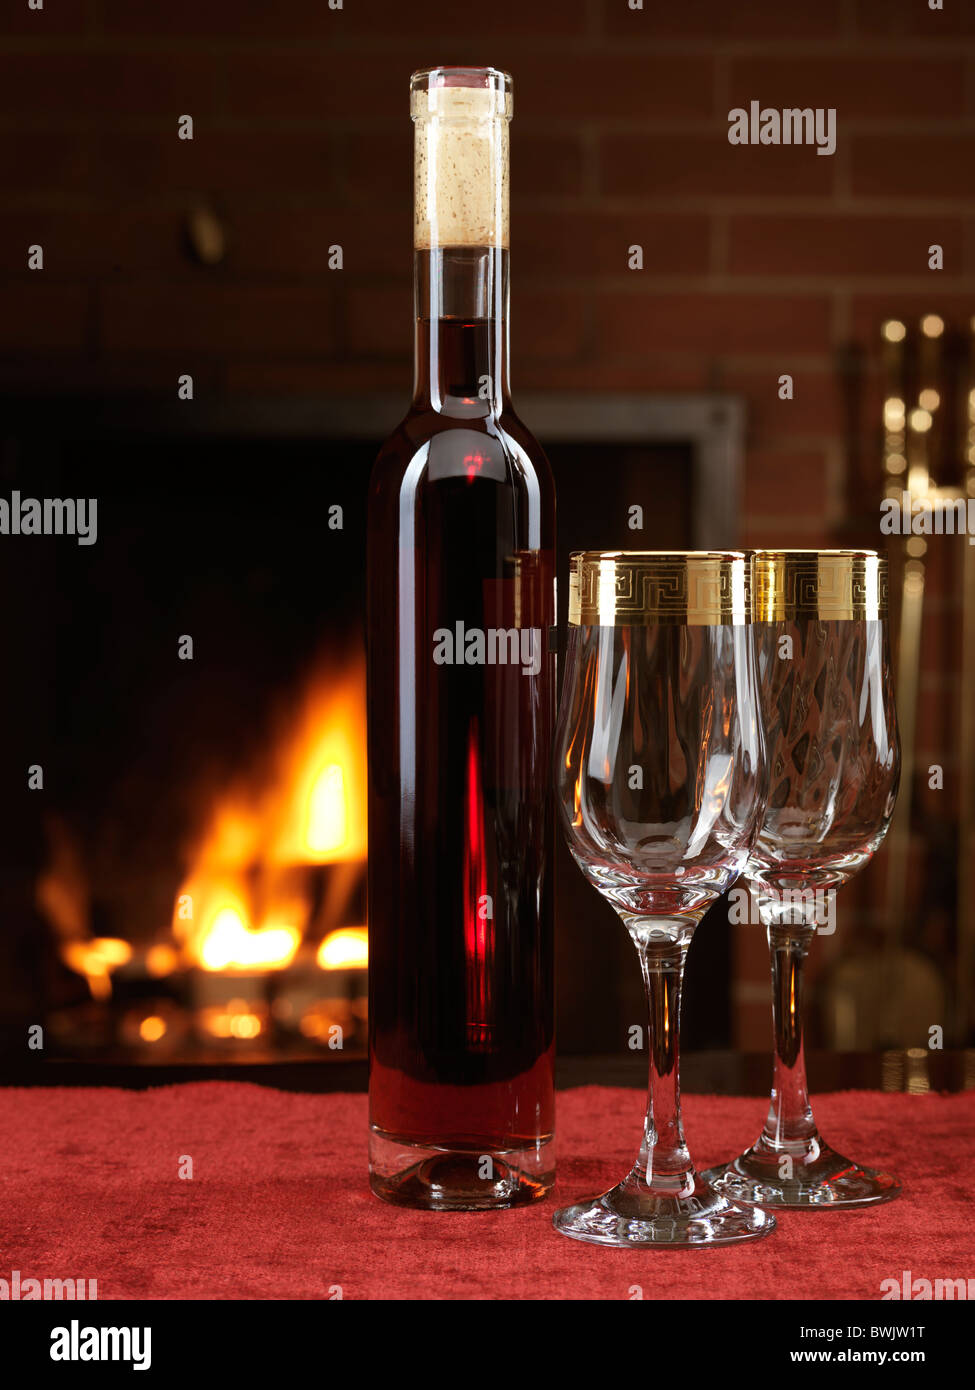 Bottle of red dry wine and two wine glasses on a table with a fireplace in the background Stock Photo